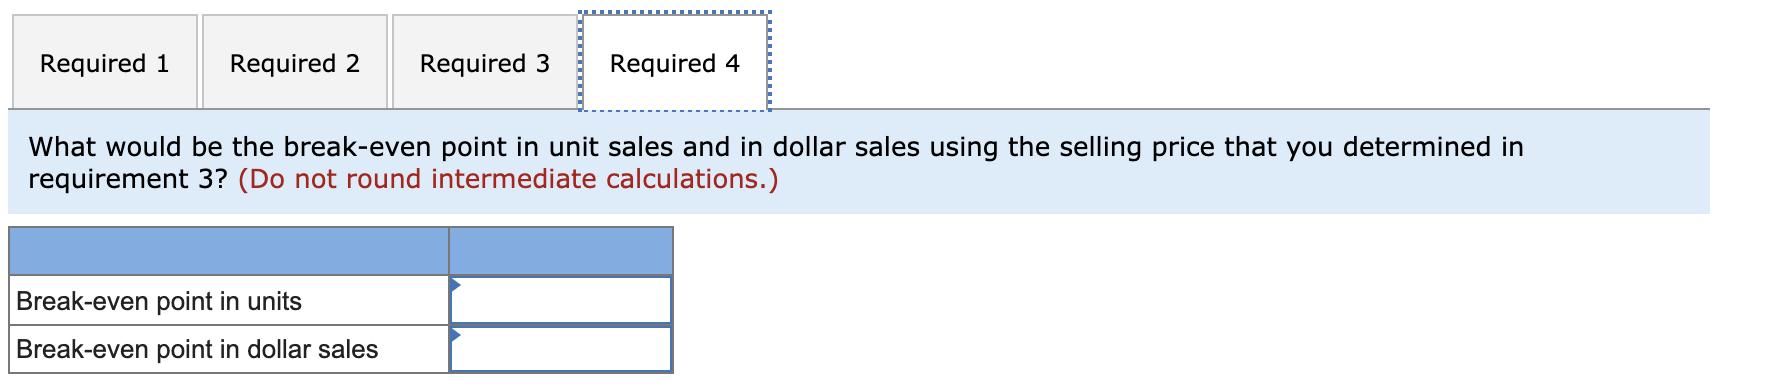 Required 1 Required 2 Required 3 Required 4 What would be the break-even point in unit sales and in dollar sales using the se